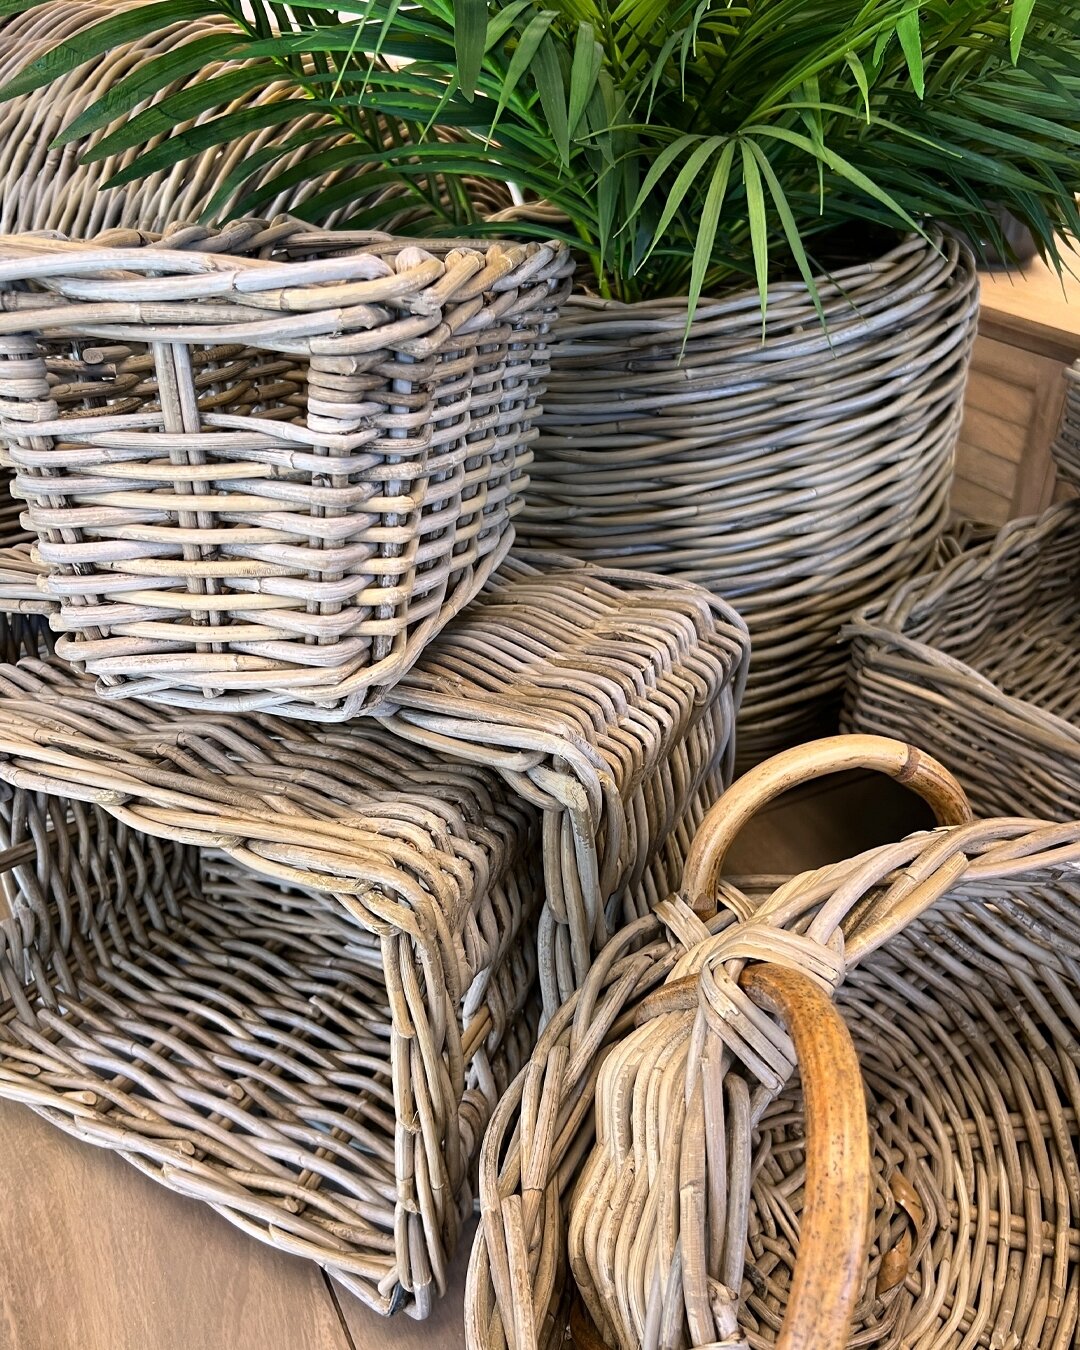 🤎 Moments in the Showroom &ndash; The ever-popular Corbeille Collection offers a range of rustic-inspired baskets and trays hand-woven with chunky rattan. The perfect decor items to dress up any space.

Book your Melbourne showroom appointment today